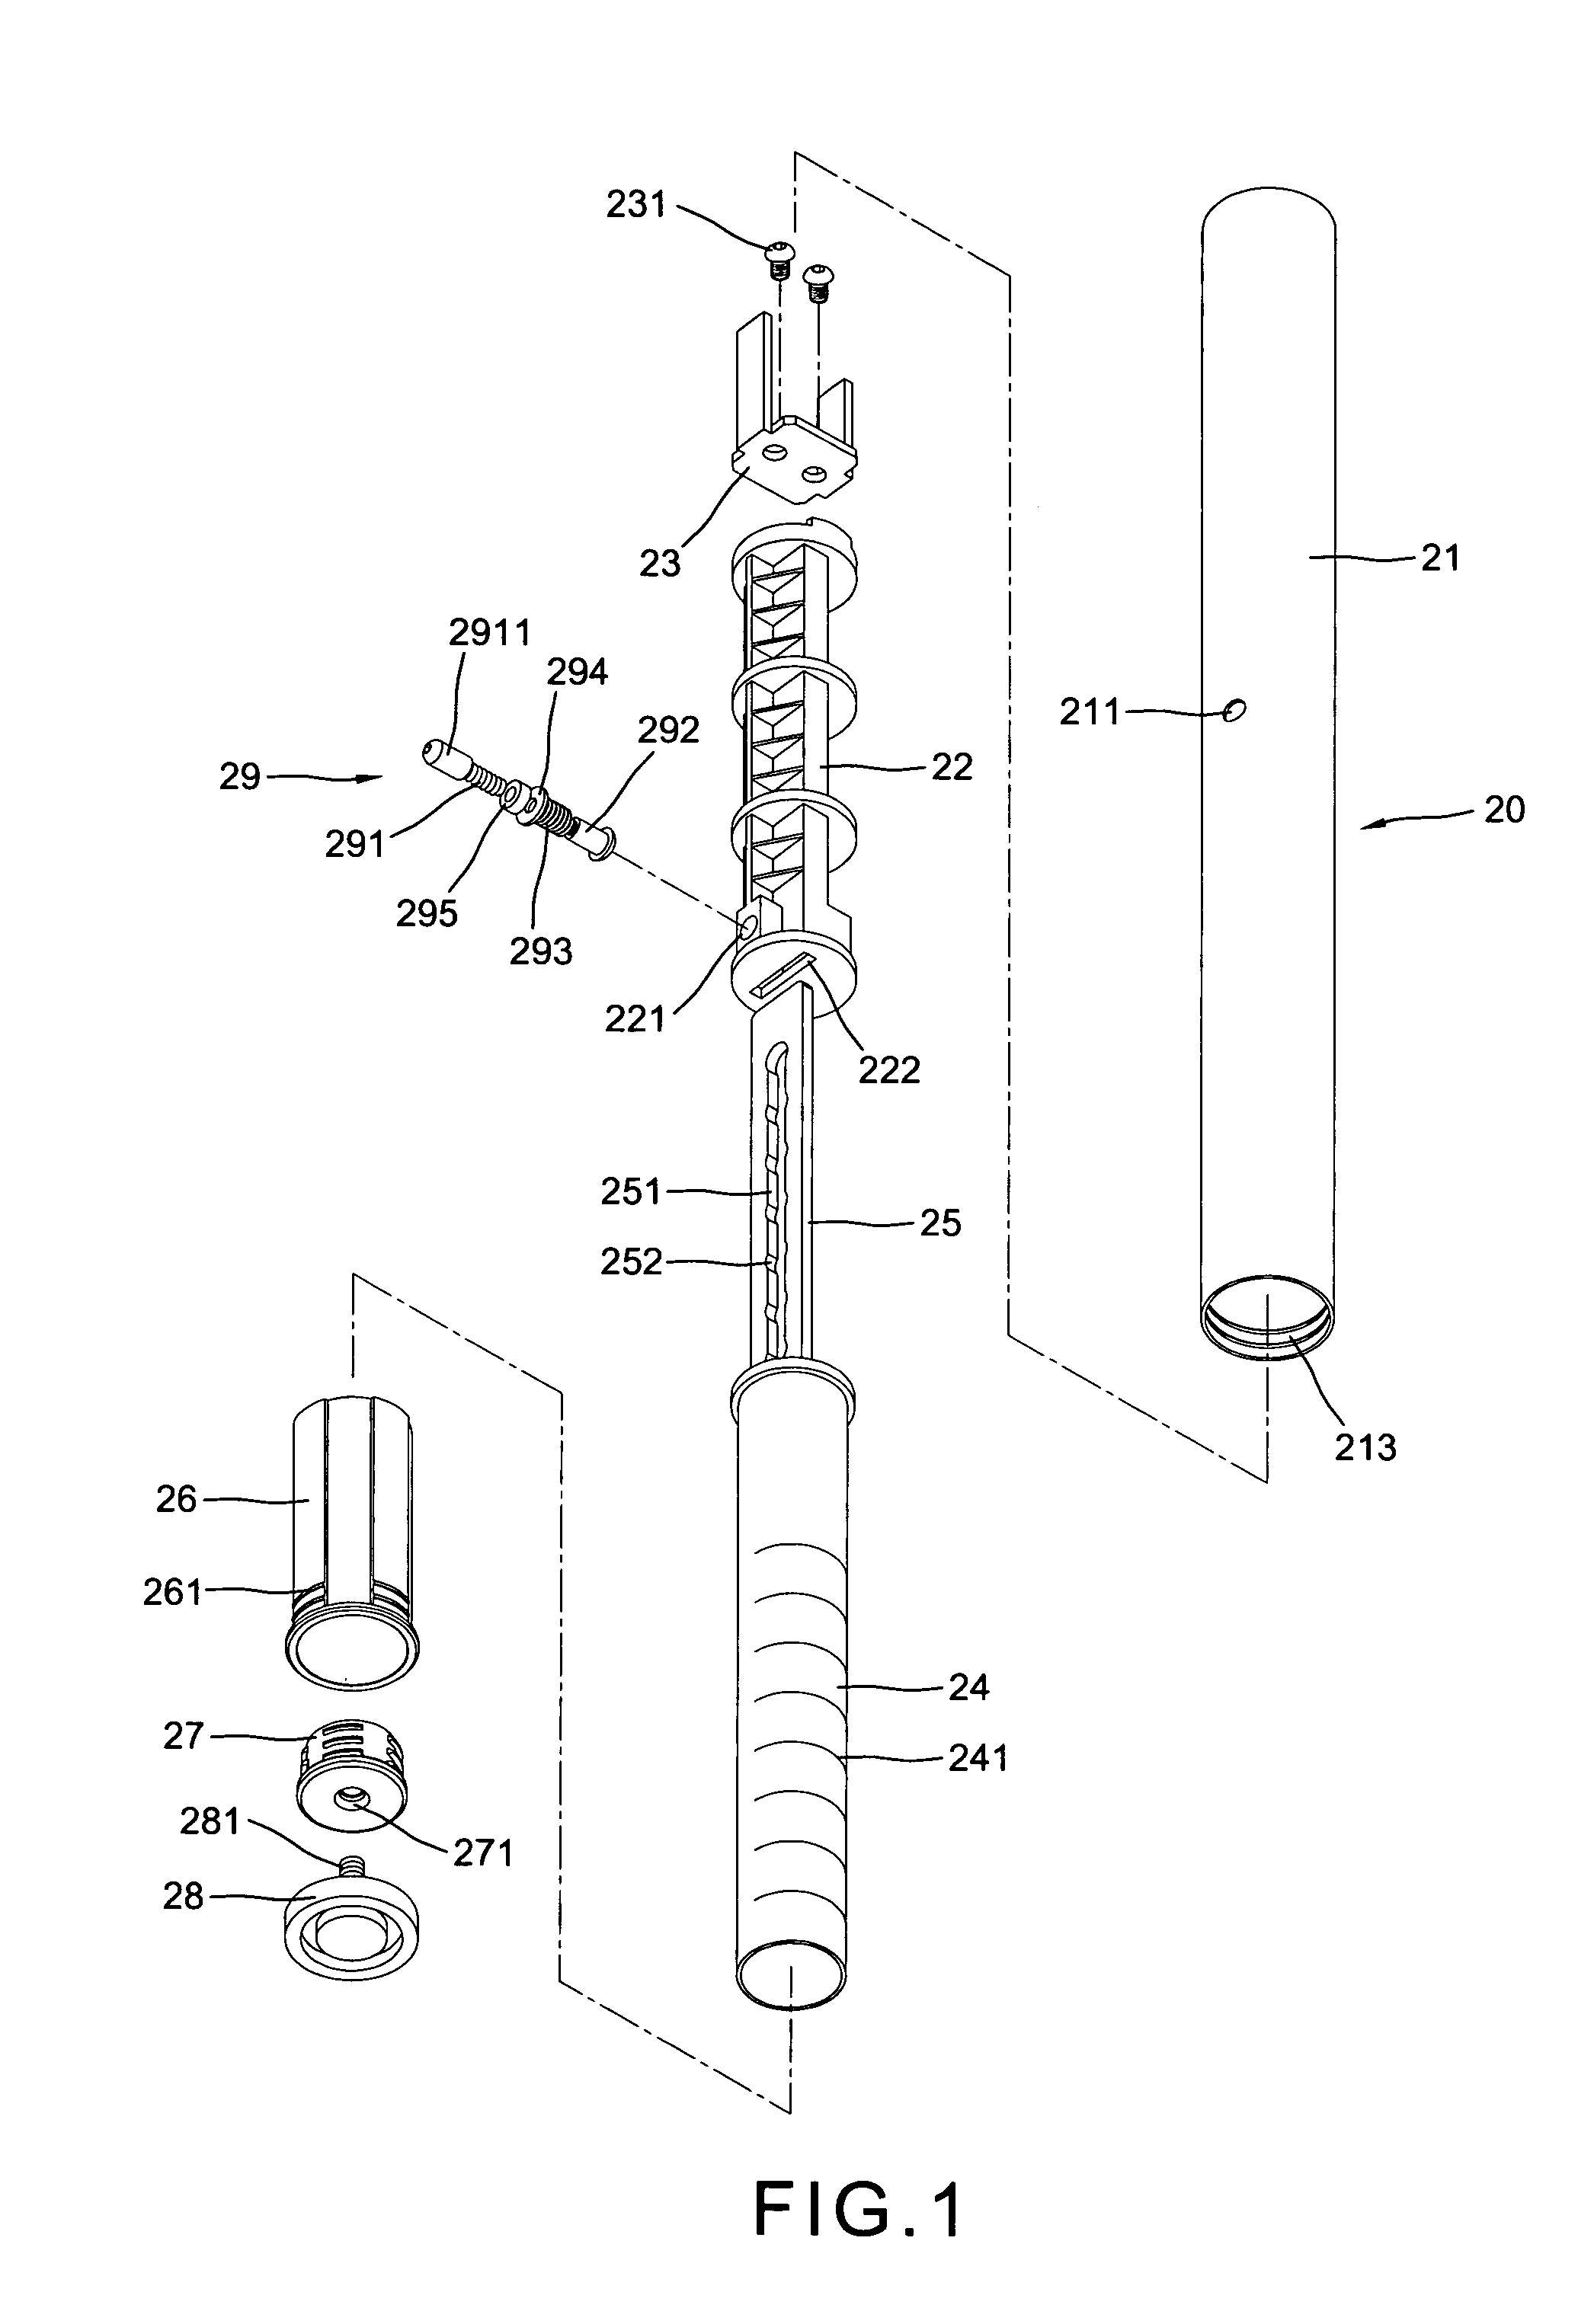 Elevation adjustment device in the legs of table